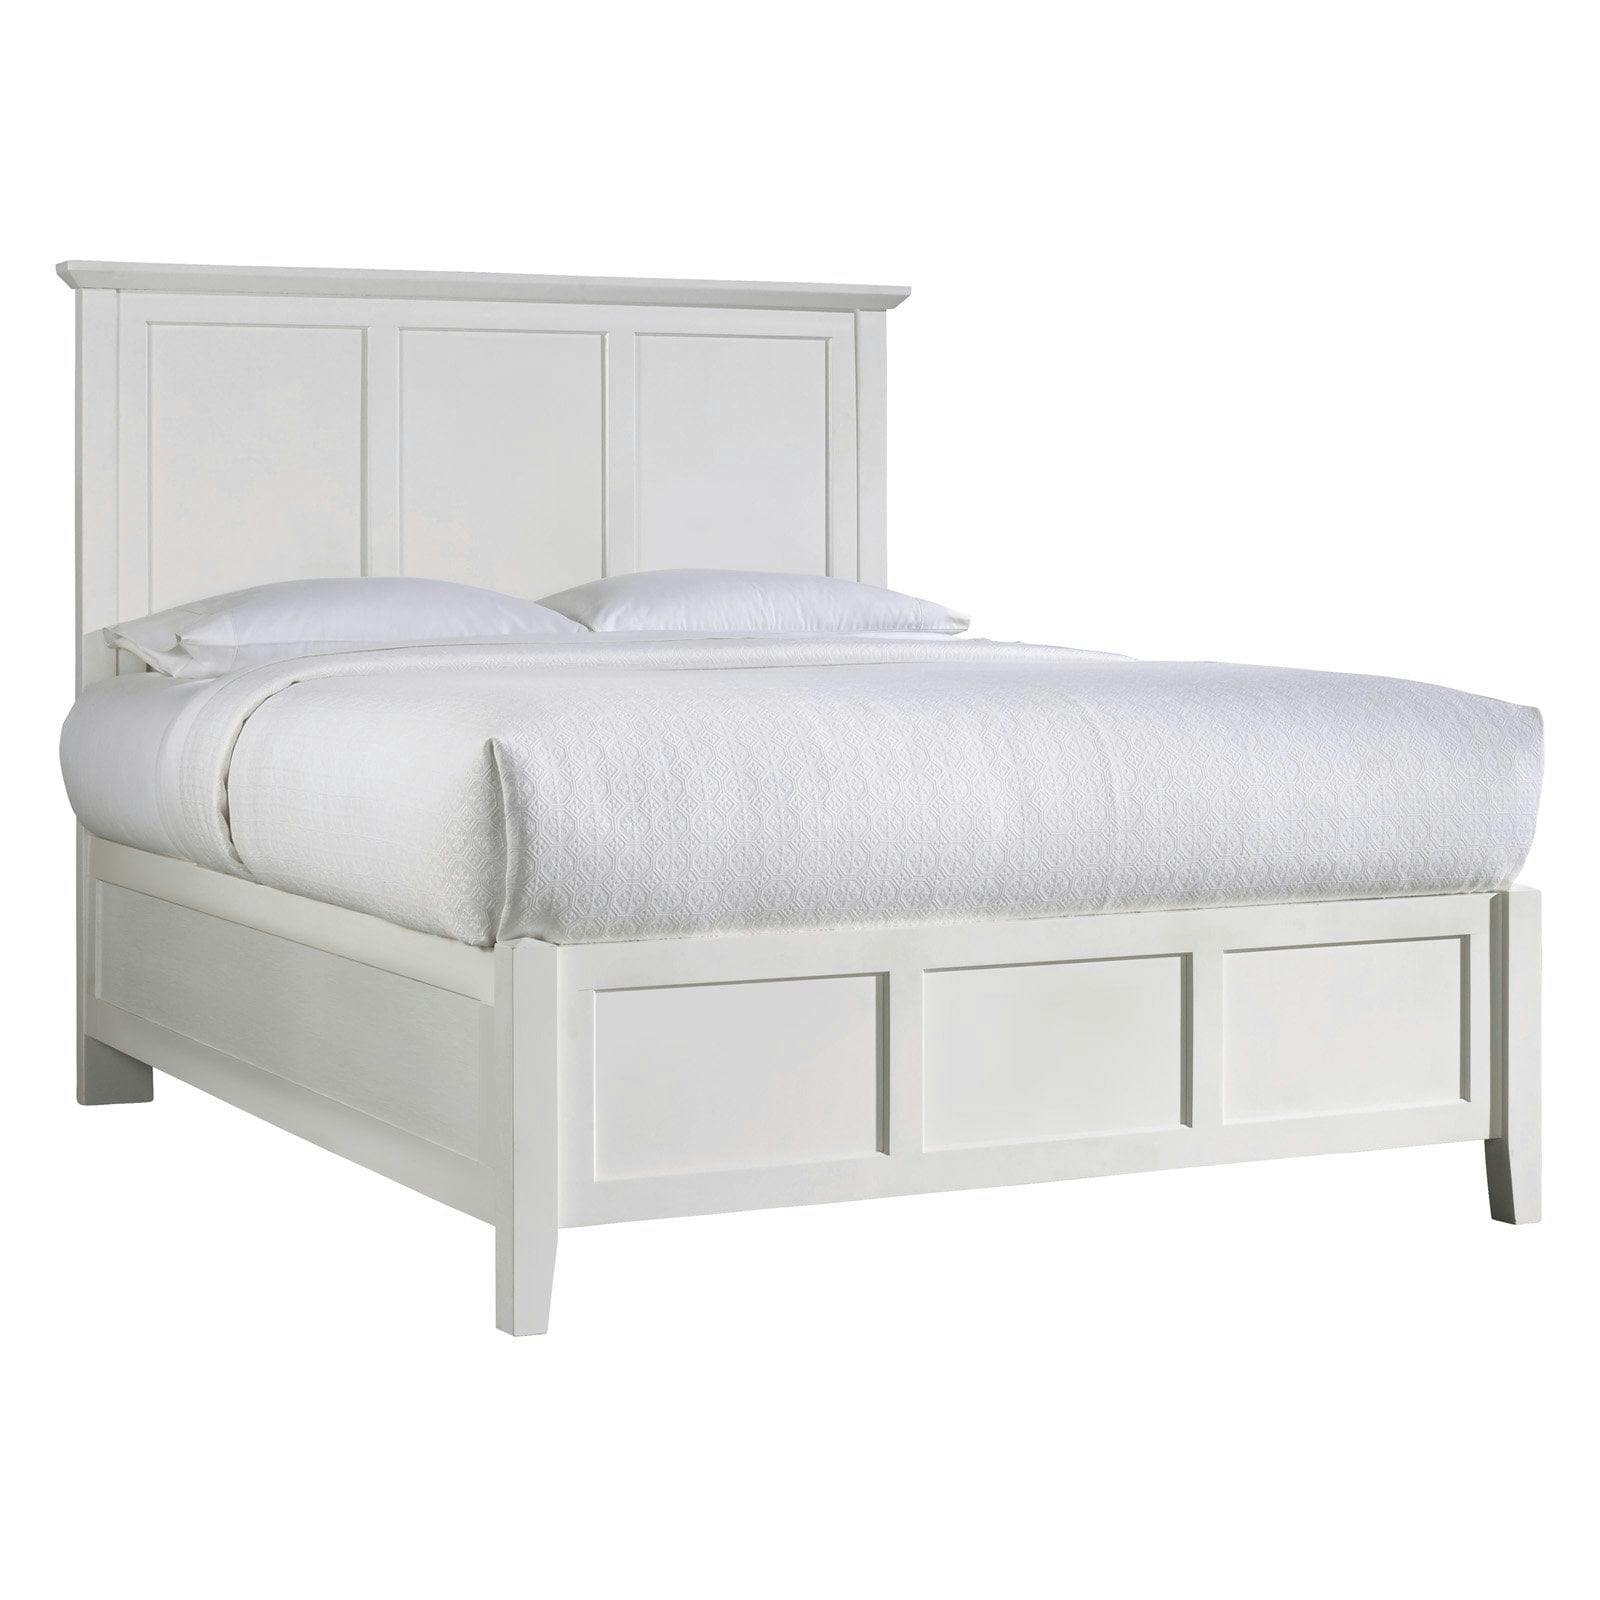 Shaker-Style Solid Mahogany California King Bed with Storage Drawers in White